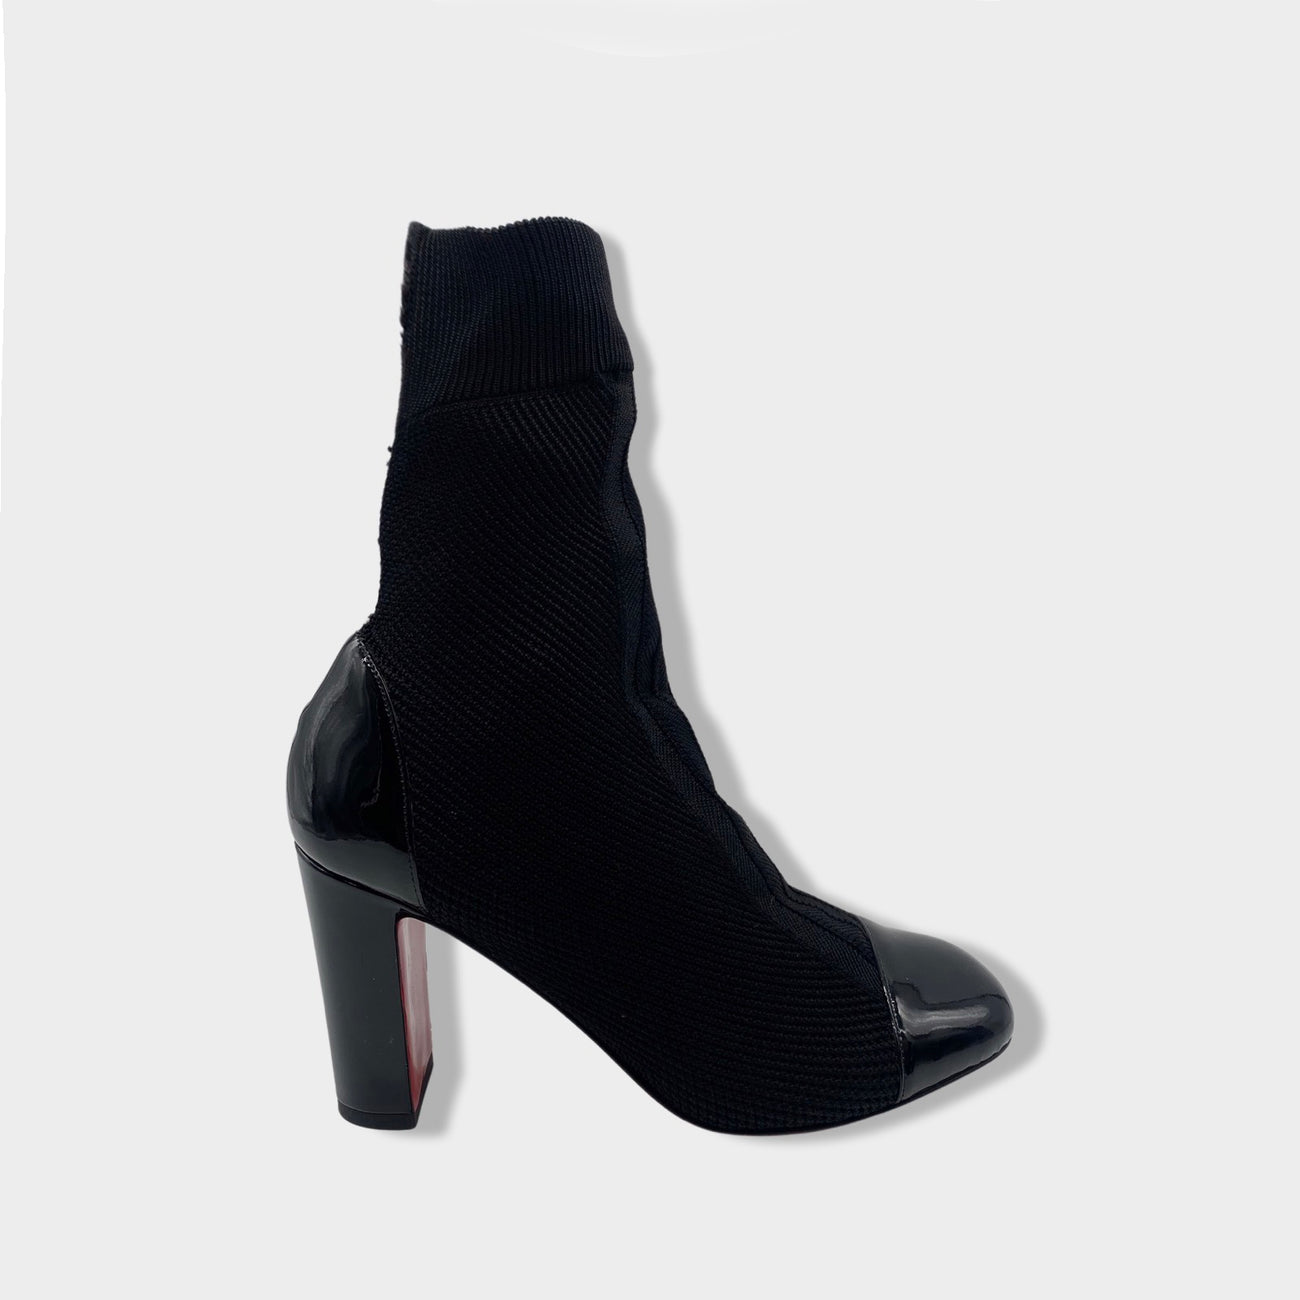 Christian Louboutin Authenticated Patent Leather Boots